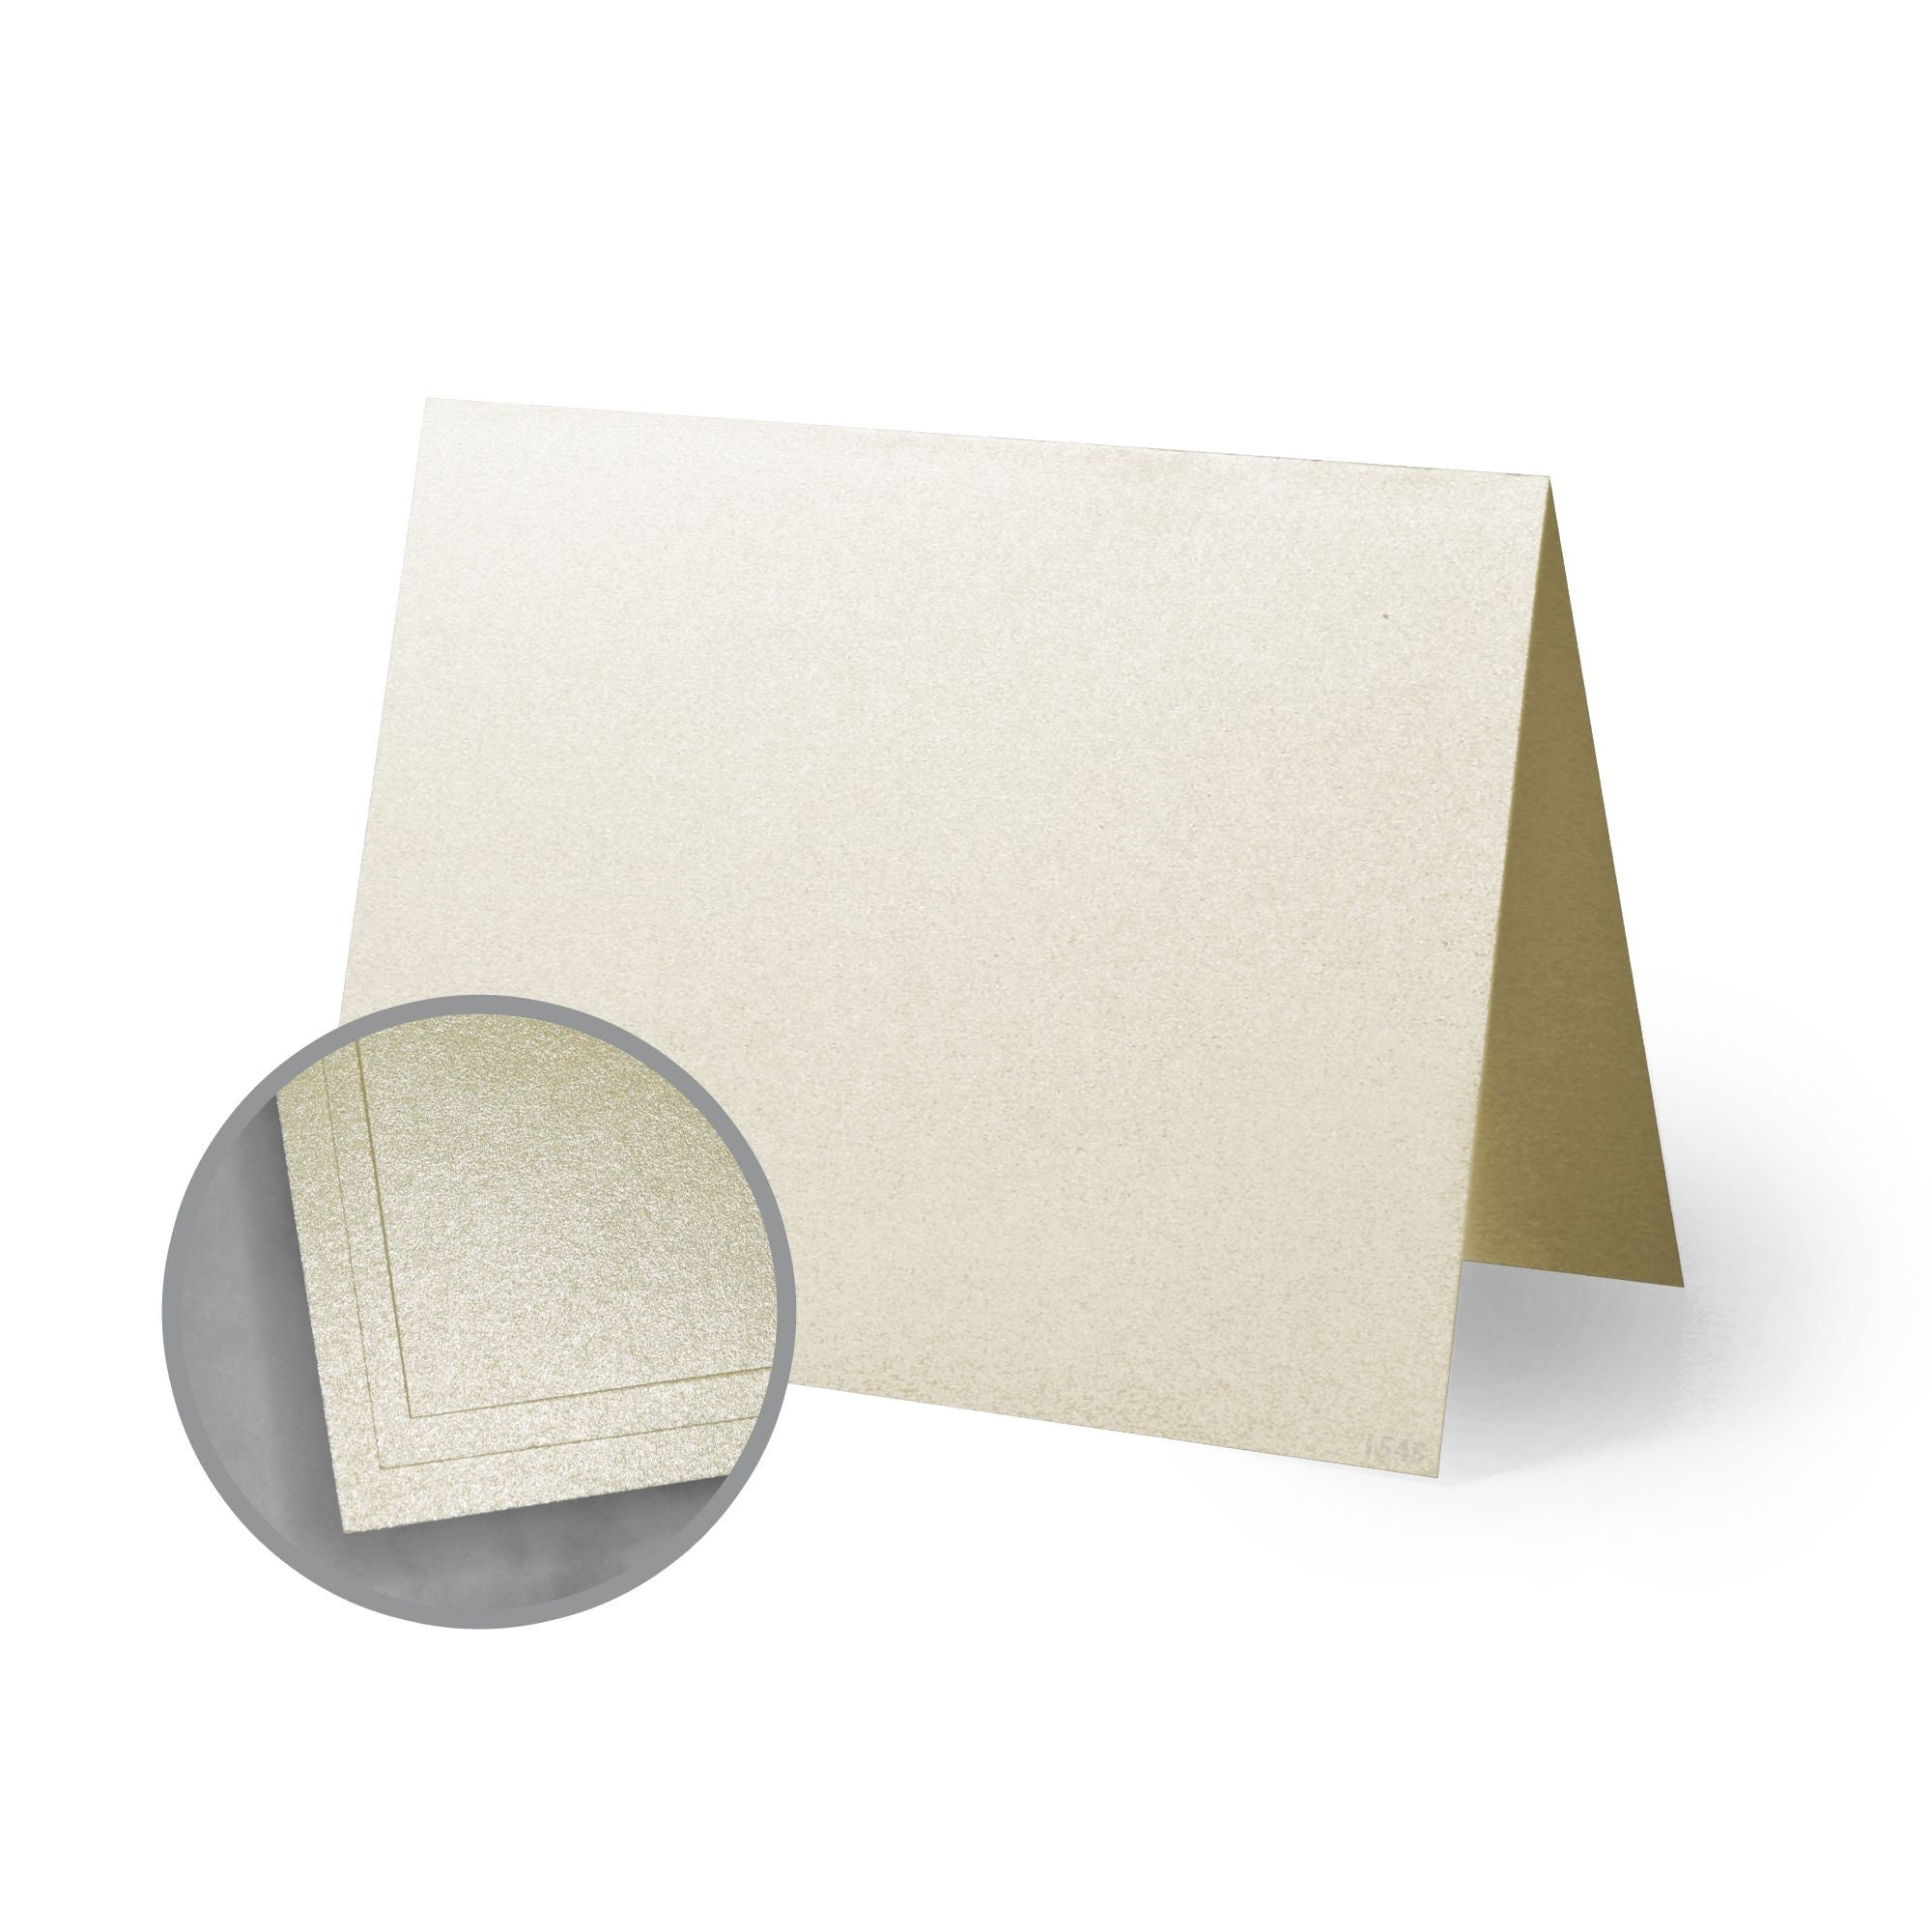 50 Sheets Thick Paper White Cardstock 4 x 6 inch Smooth Heavy Cards Stock Printer Paper for Invitations, Menus, Wedding, DIY Cards, 250gsm Thick